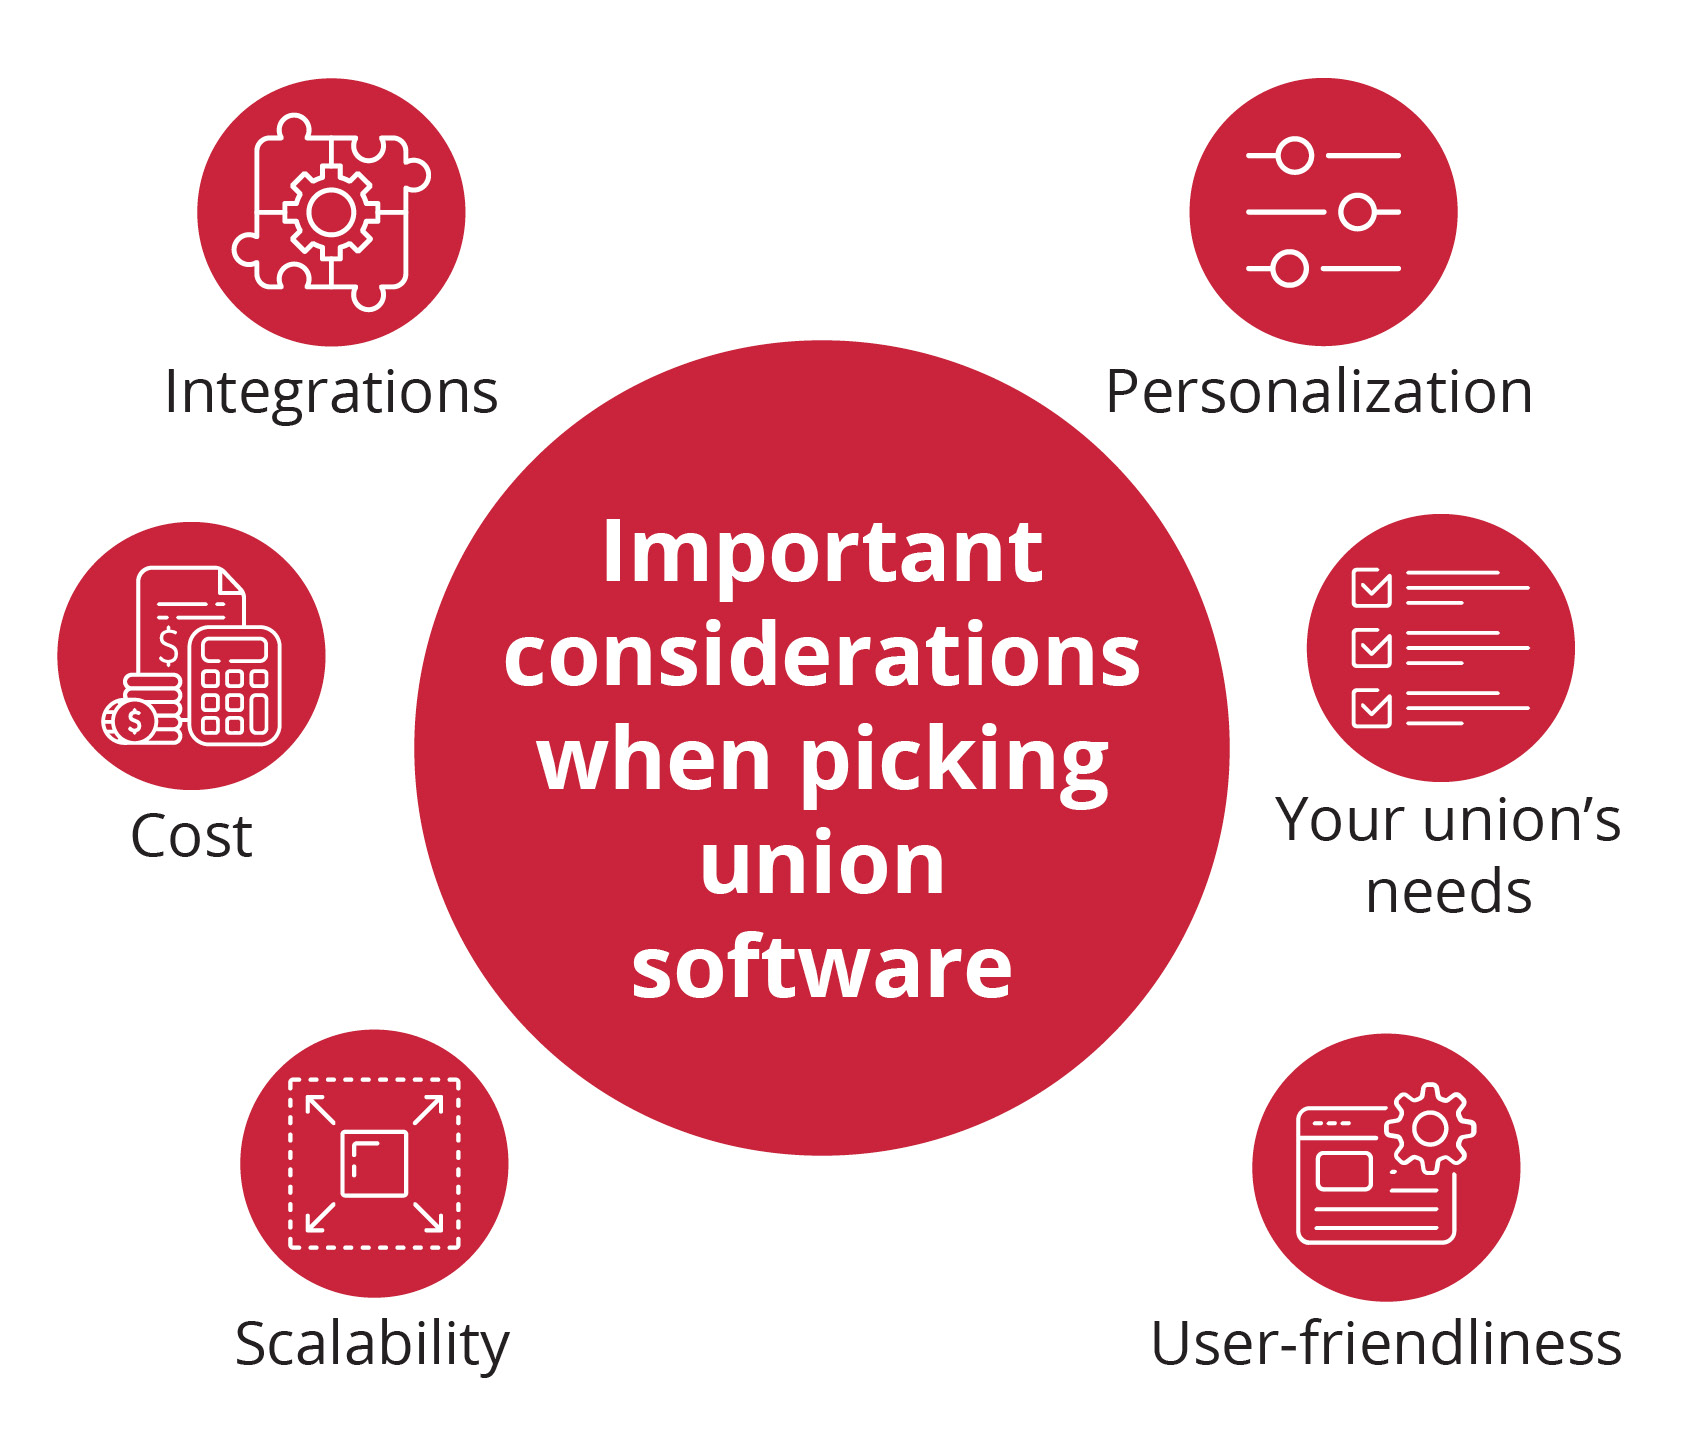 This image shows important considerations for picking union software, covered in the text below.